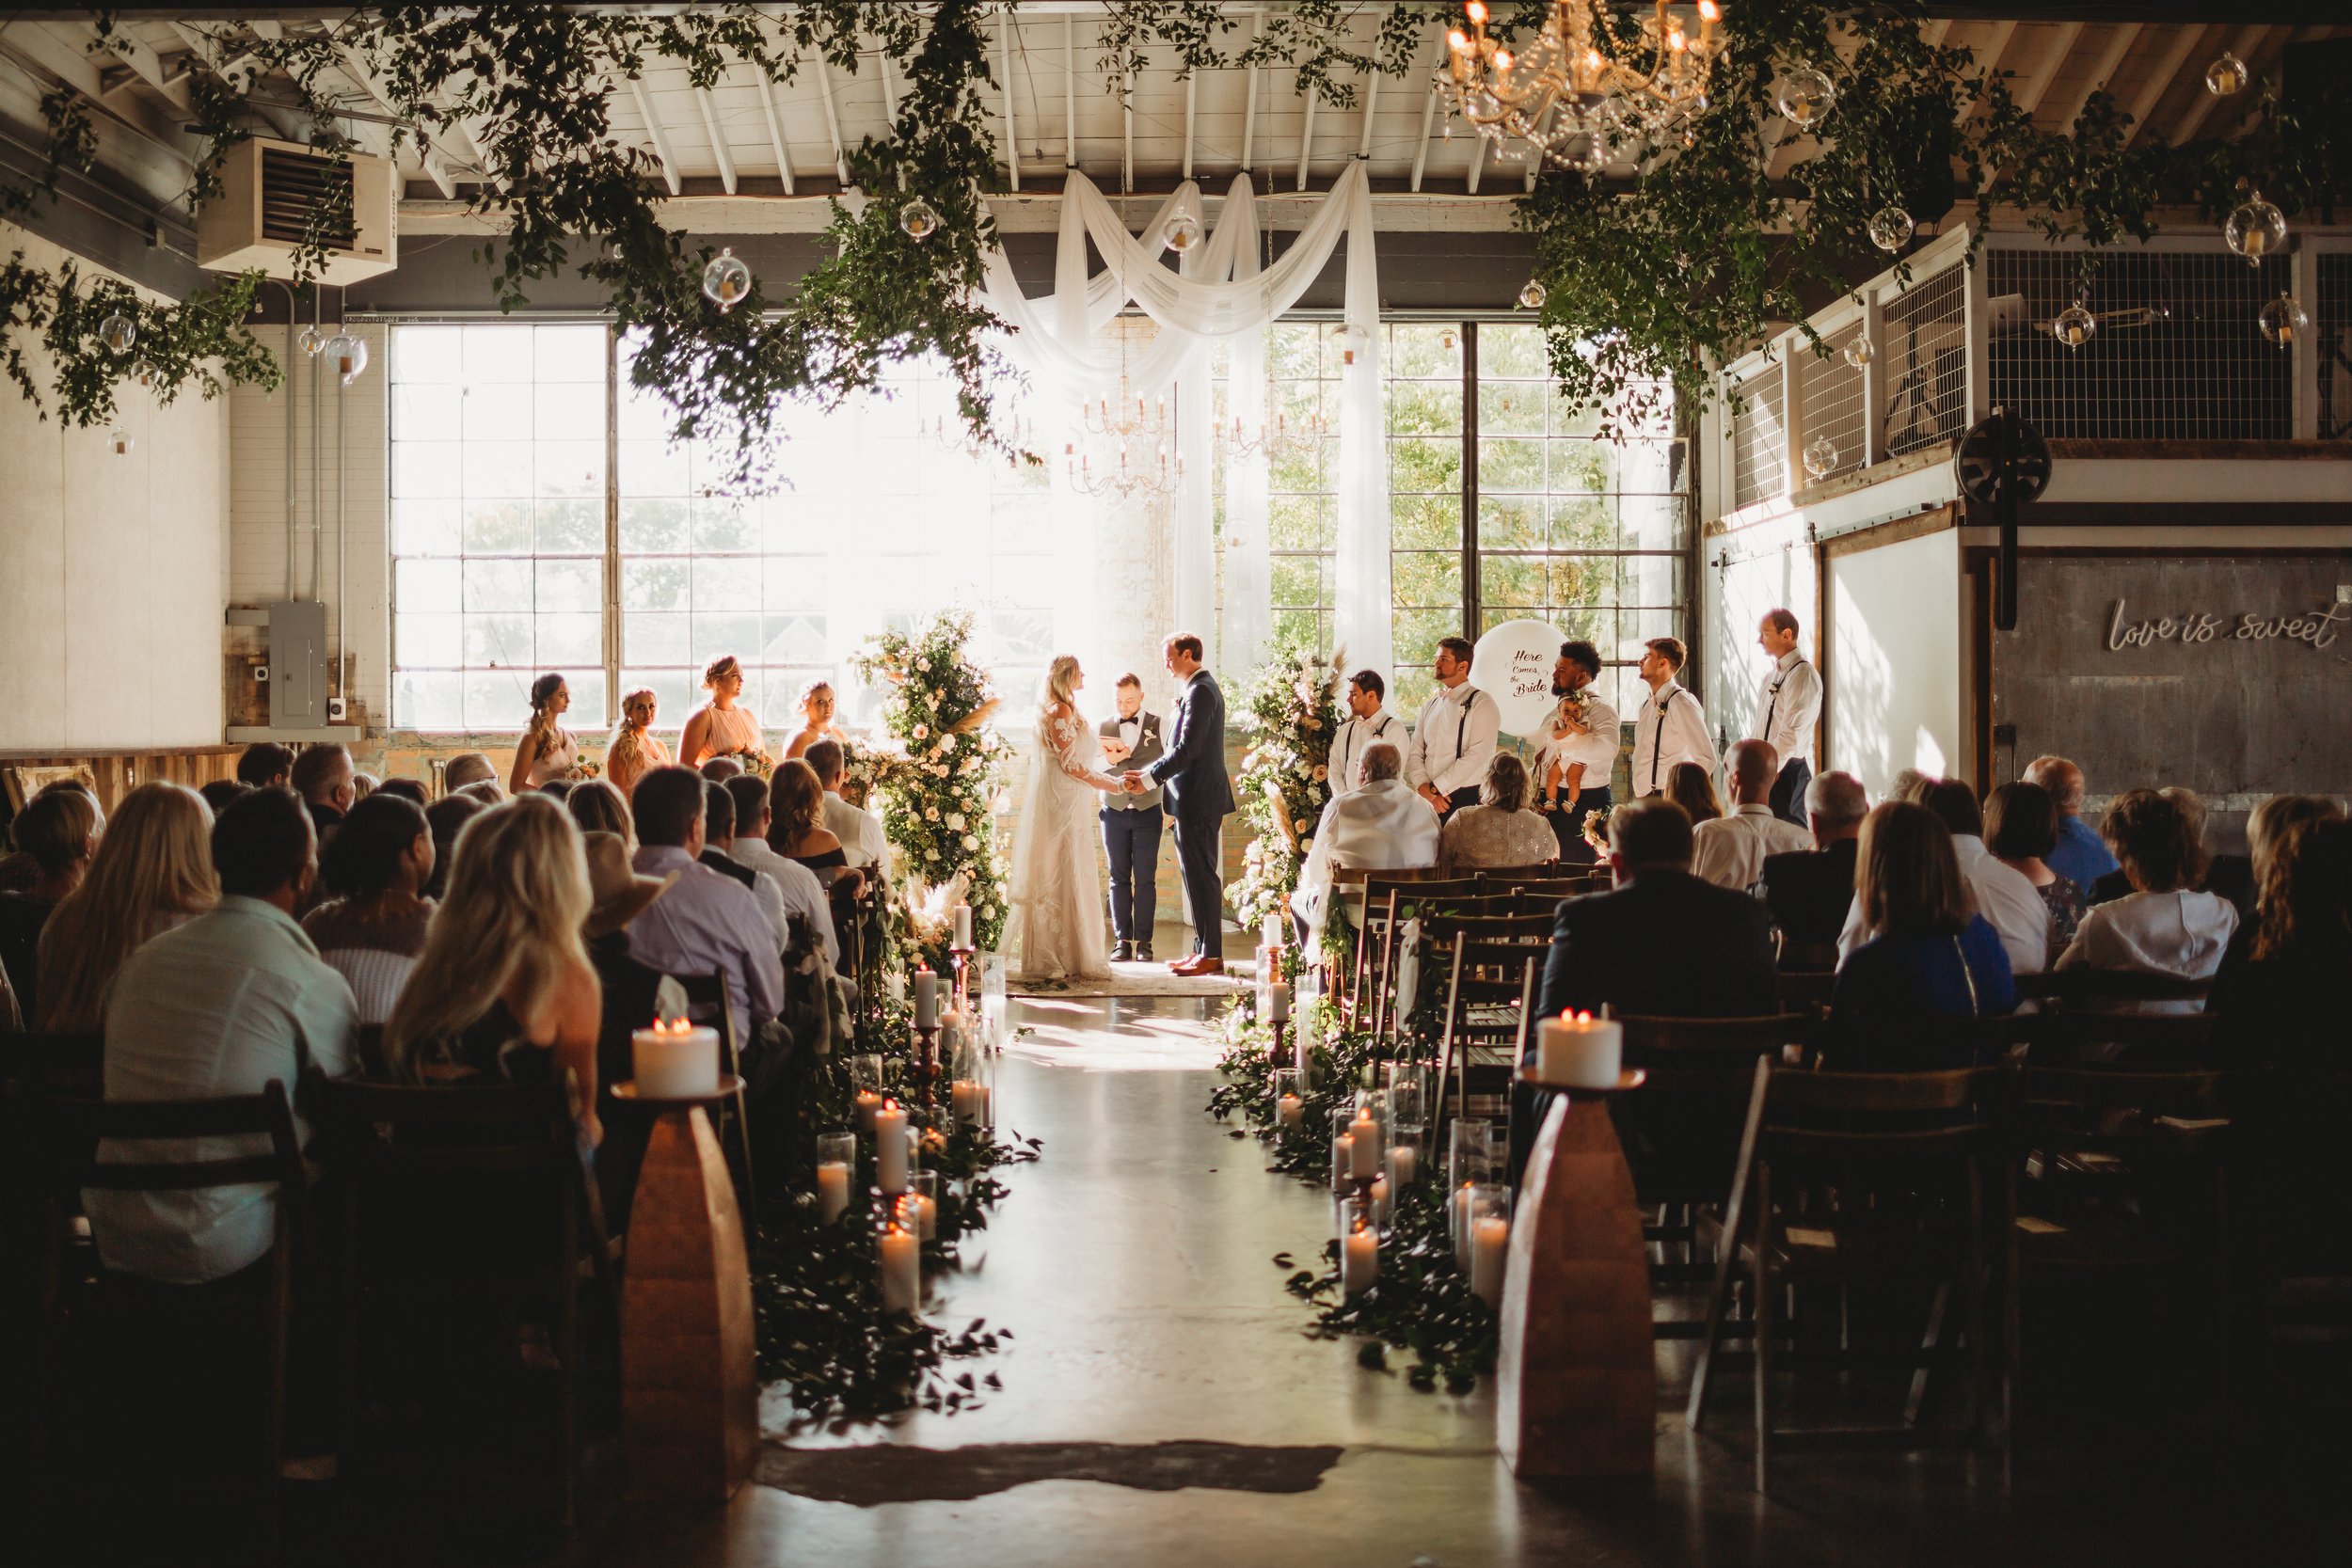 A Beautiful and Affordable Wedding Venue - The Bright Building